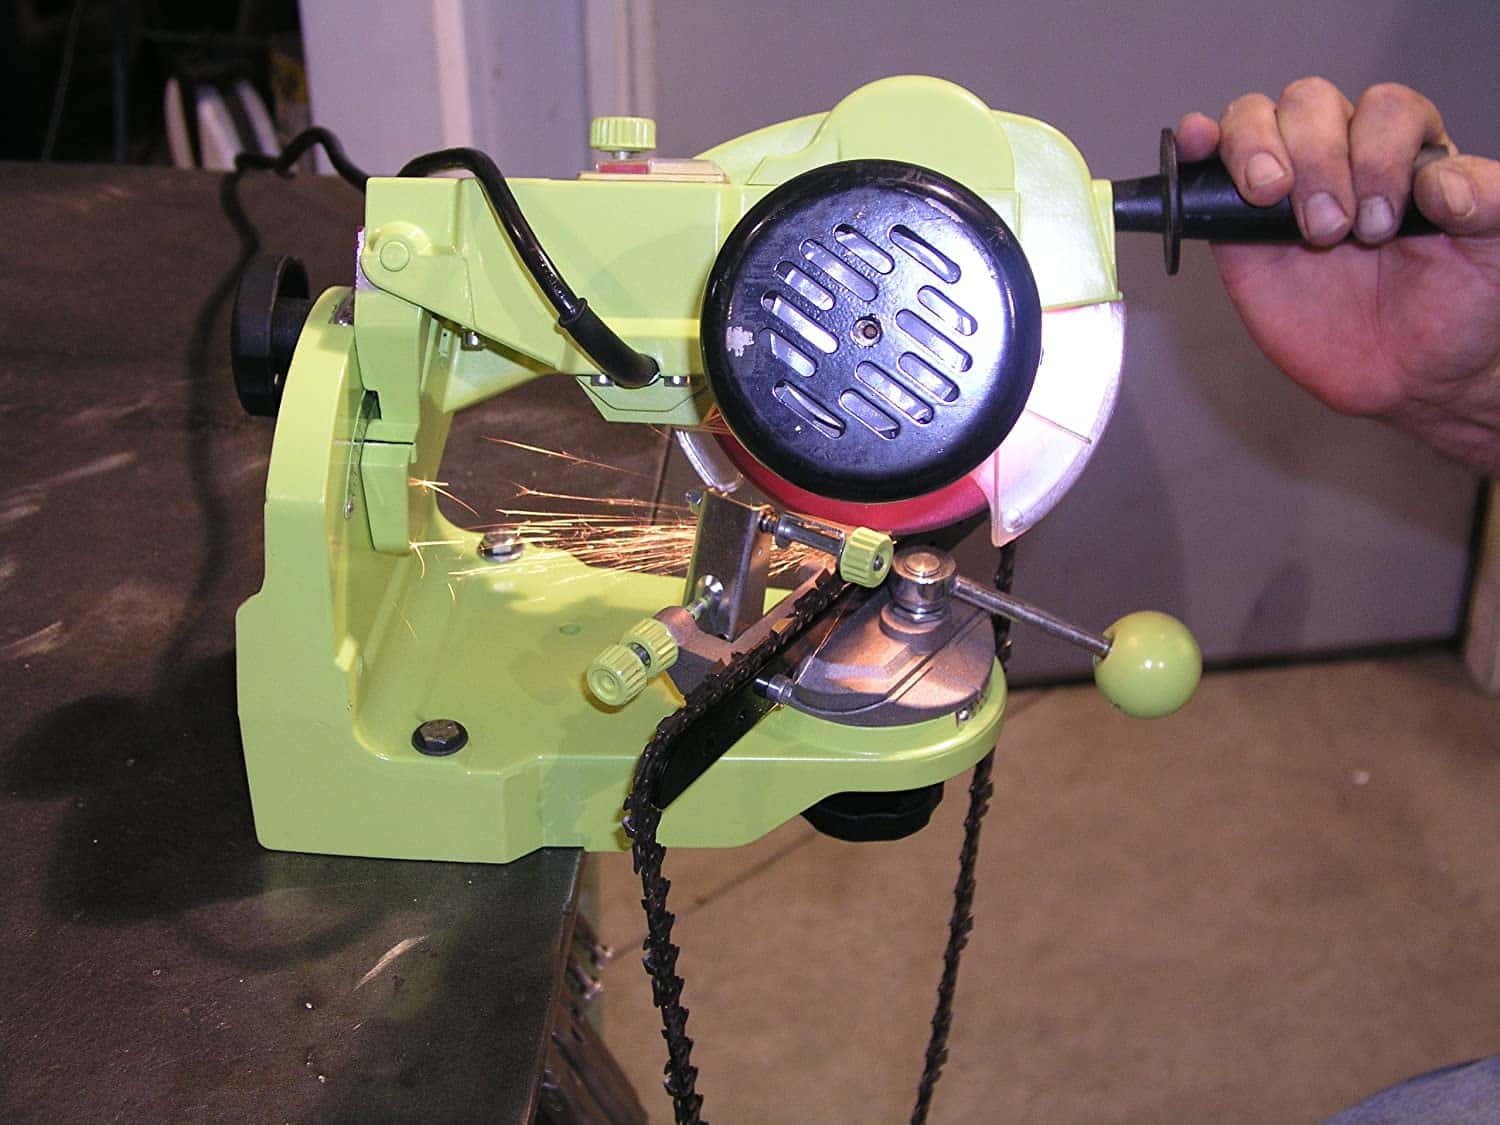 Timber Tuff CS – BWM Electric Sharpener1 - What Is the Best Chainsaw Sharpener in 2022? swiftly and efficiently recover the cutting edge of your chainsaw, saving you both time and money. - HandyMan.Guide - chainsaw sharpener